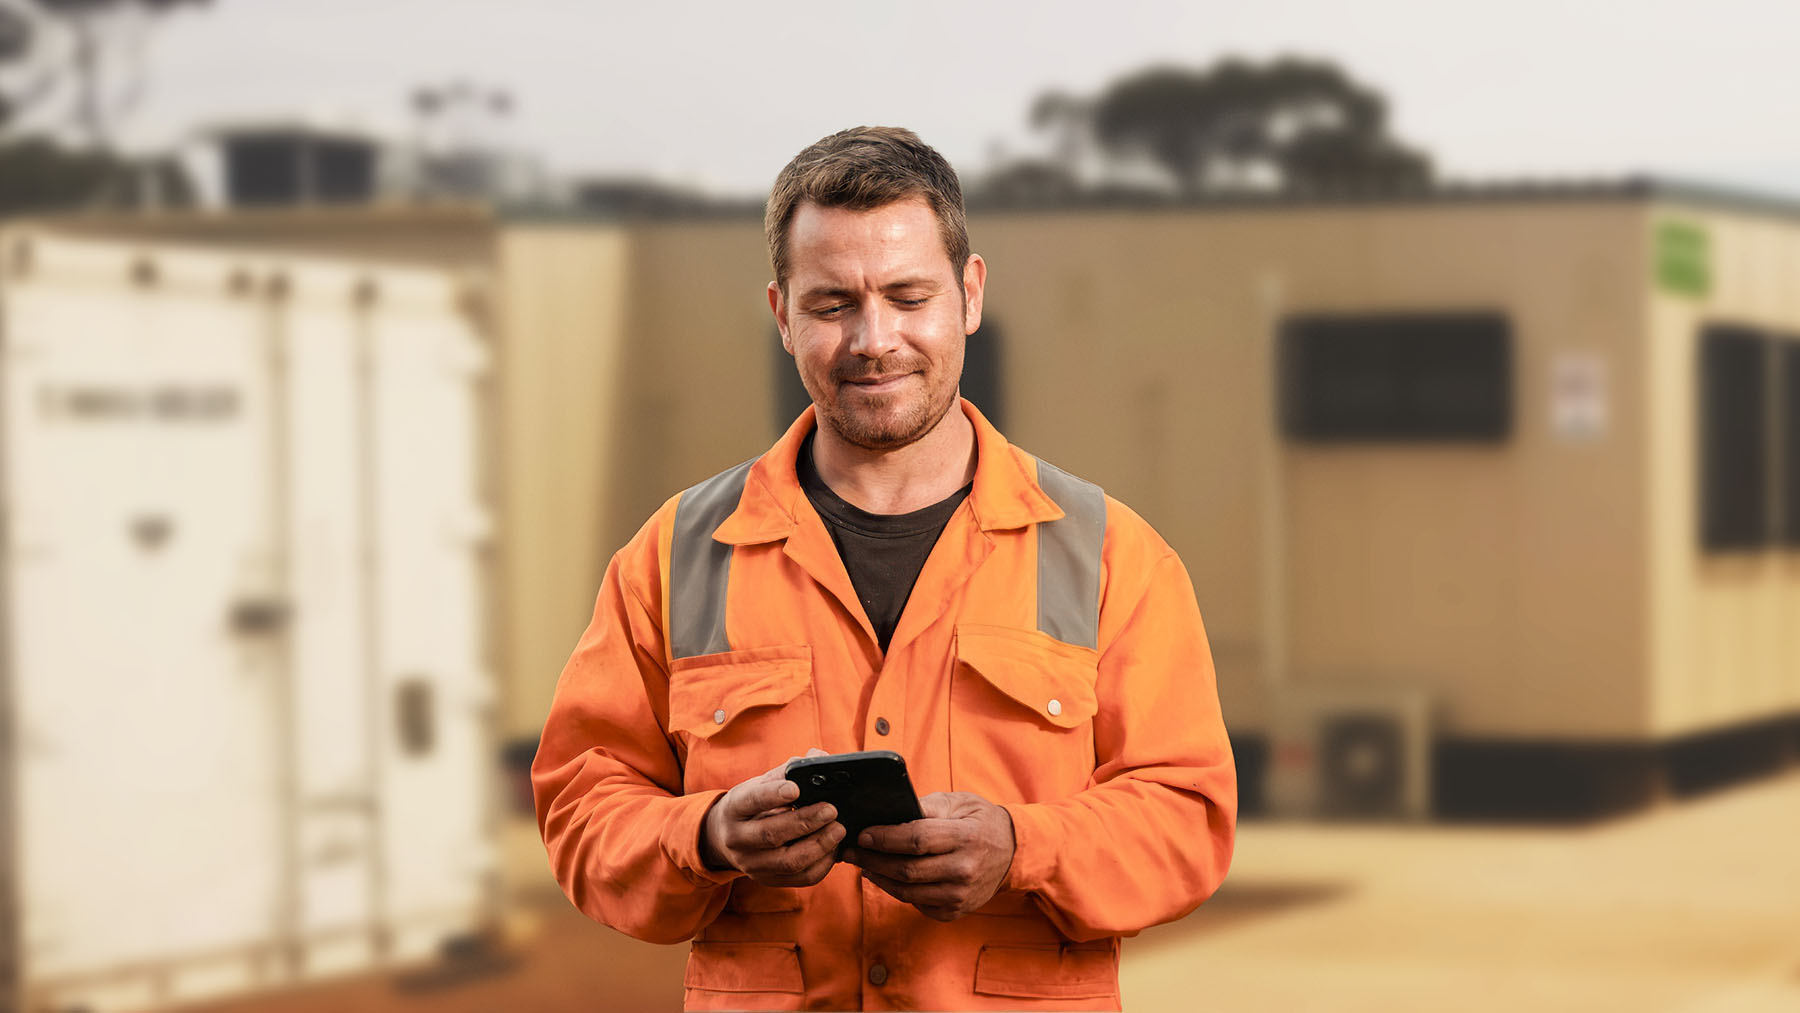 FIFO worker smiles while looking at cellphone outside.